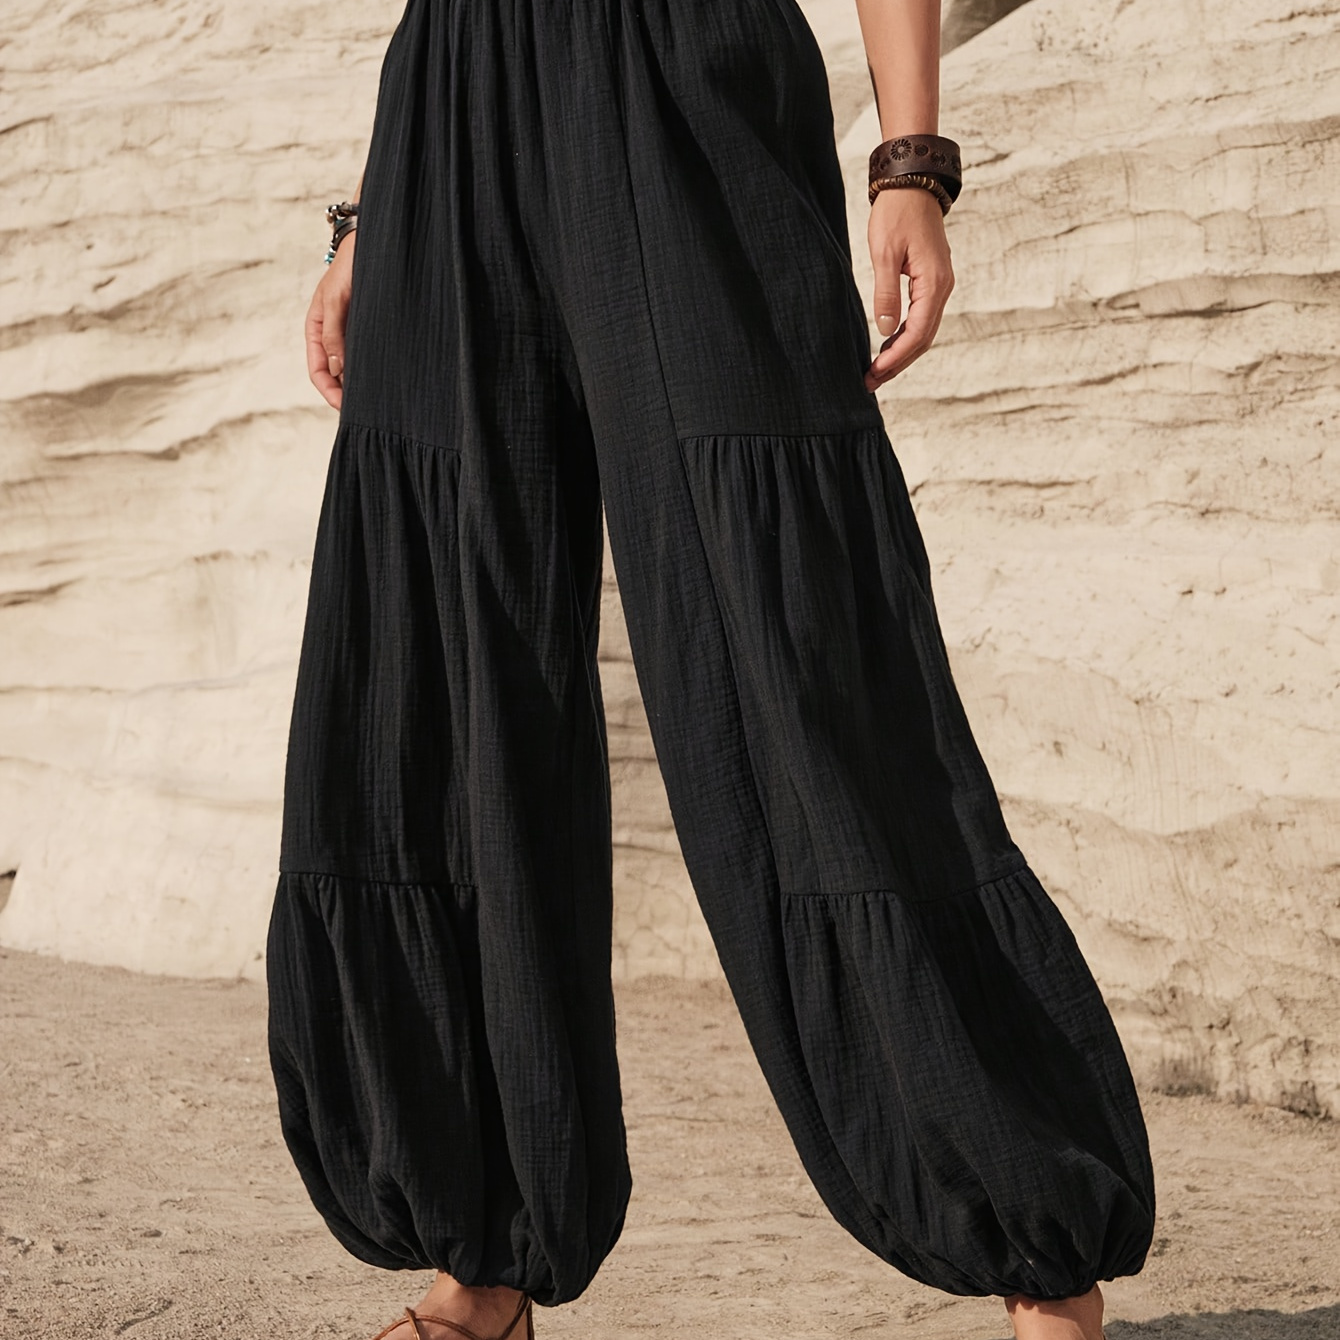 

Solid Color High Waist Pants, Vacation Loose Long Length Pants For Every Day, Women's Clothing